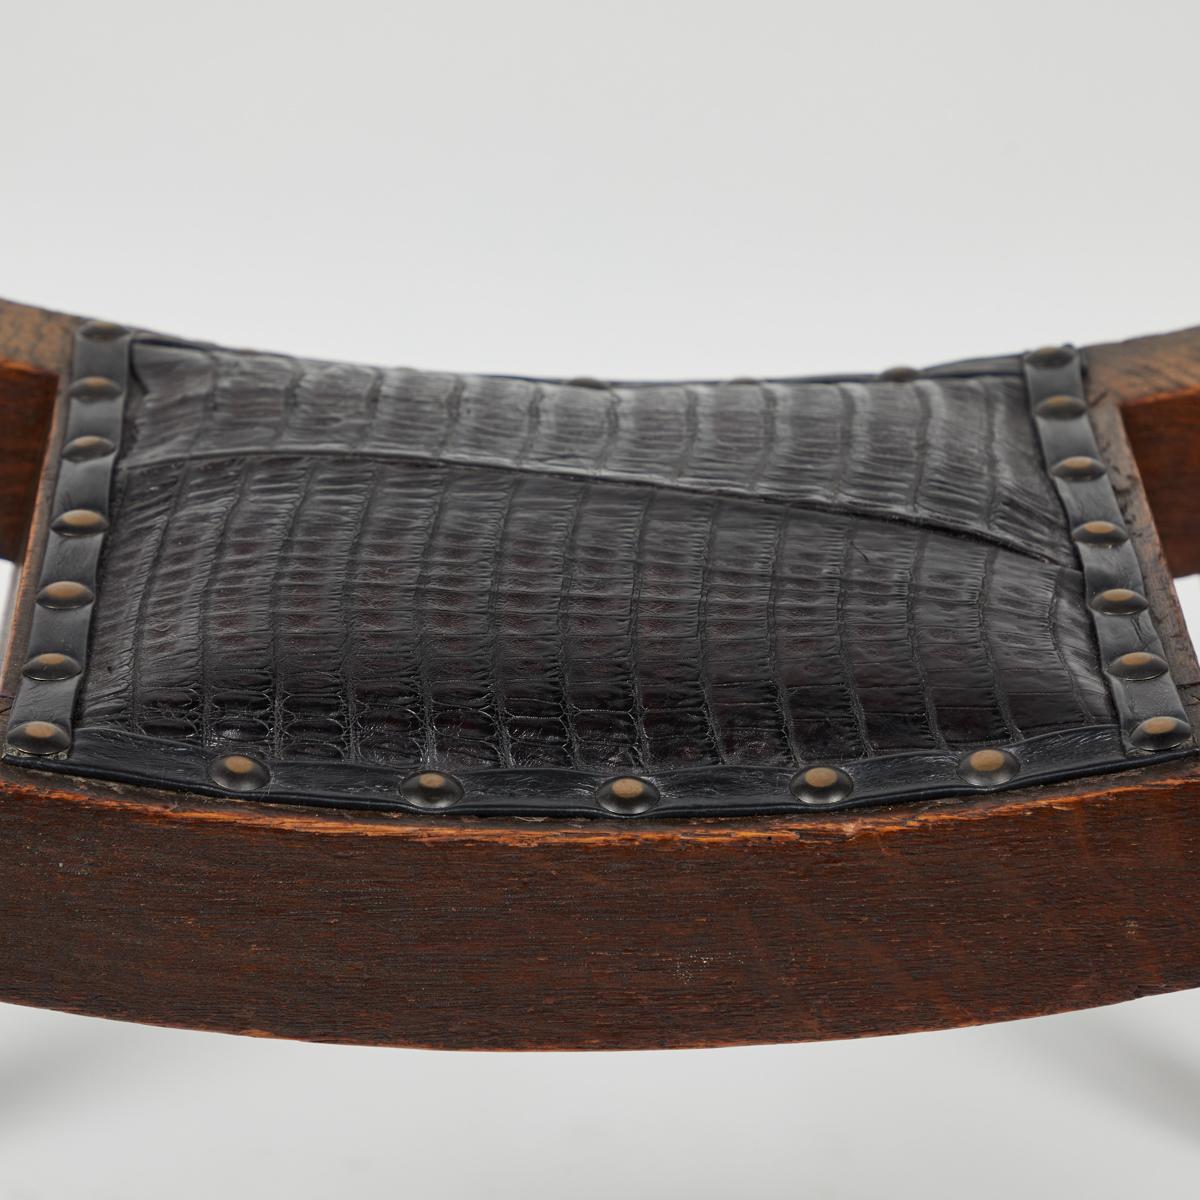 19th Century English Foot Stool with Upholstered Black Leather and Studded Trim (Englisch)